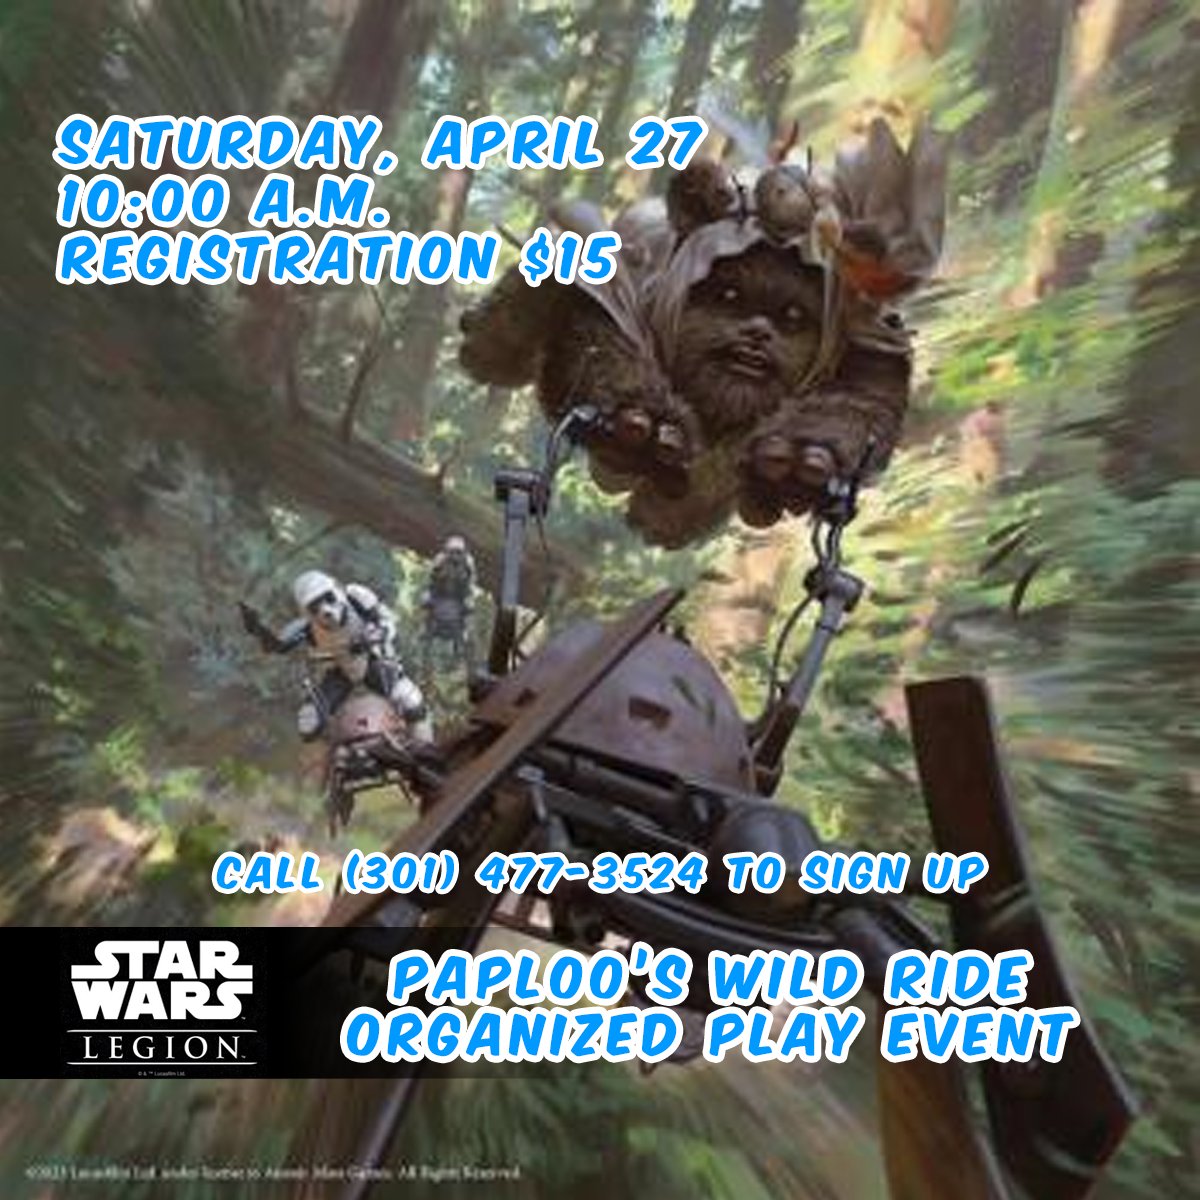 Join us for Star Wars Legion on Saturday, April 27 at 10:00 a.m.! Bring your 800 point army and participate in Paploo's Wild Ride OP Kit. Win alternate art cards and other prizes in this casual event focused on the Battle of Endor! Entry fee is $15 - don't miss out!